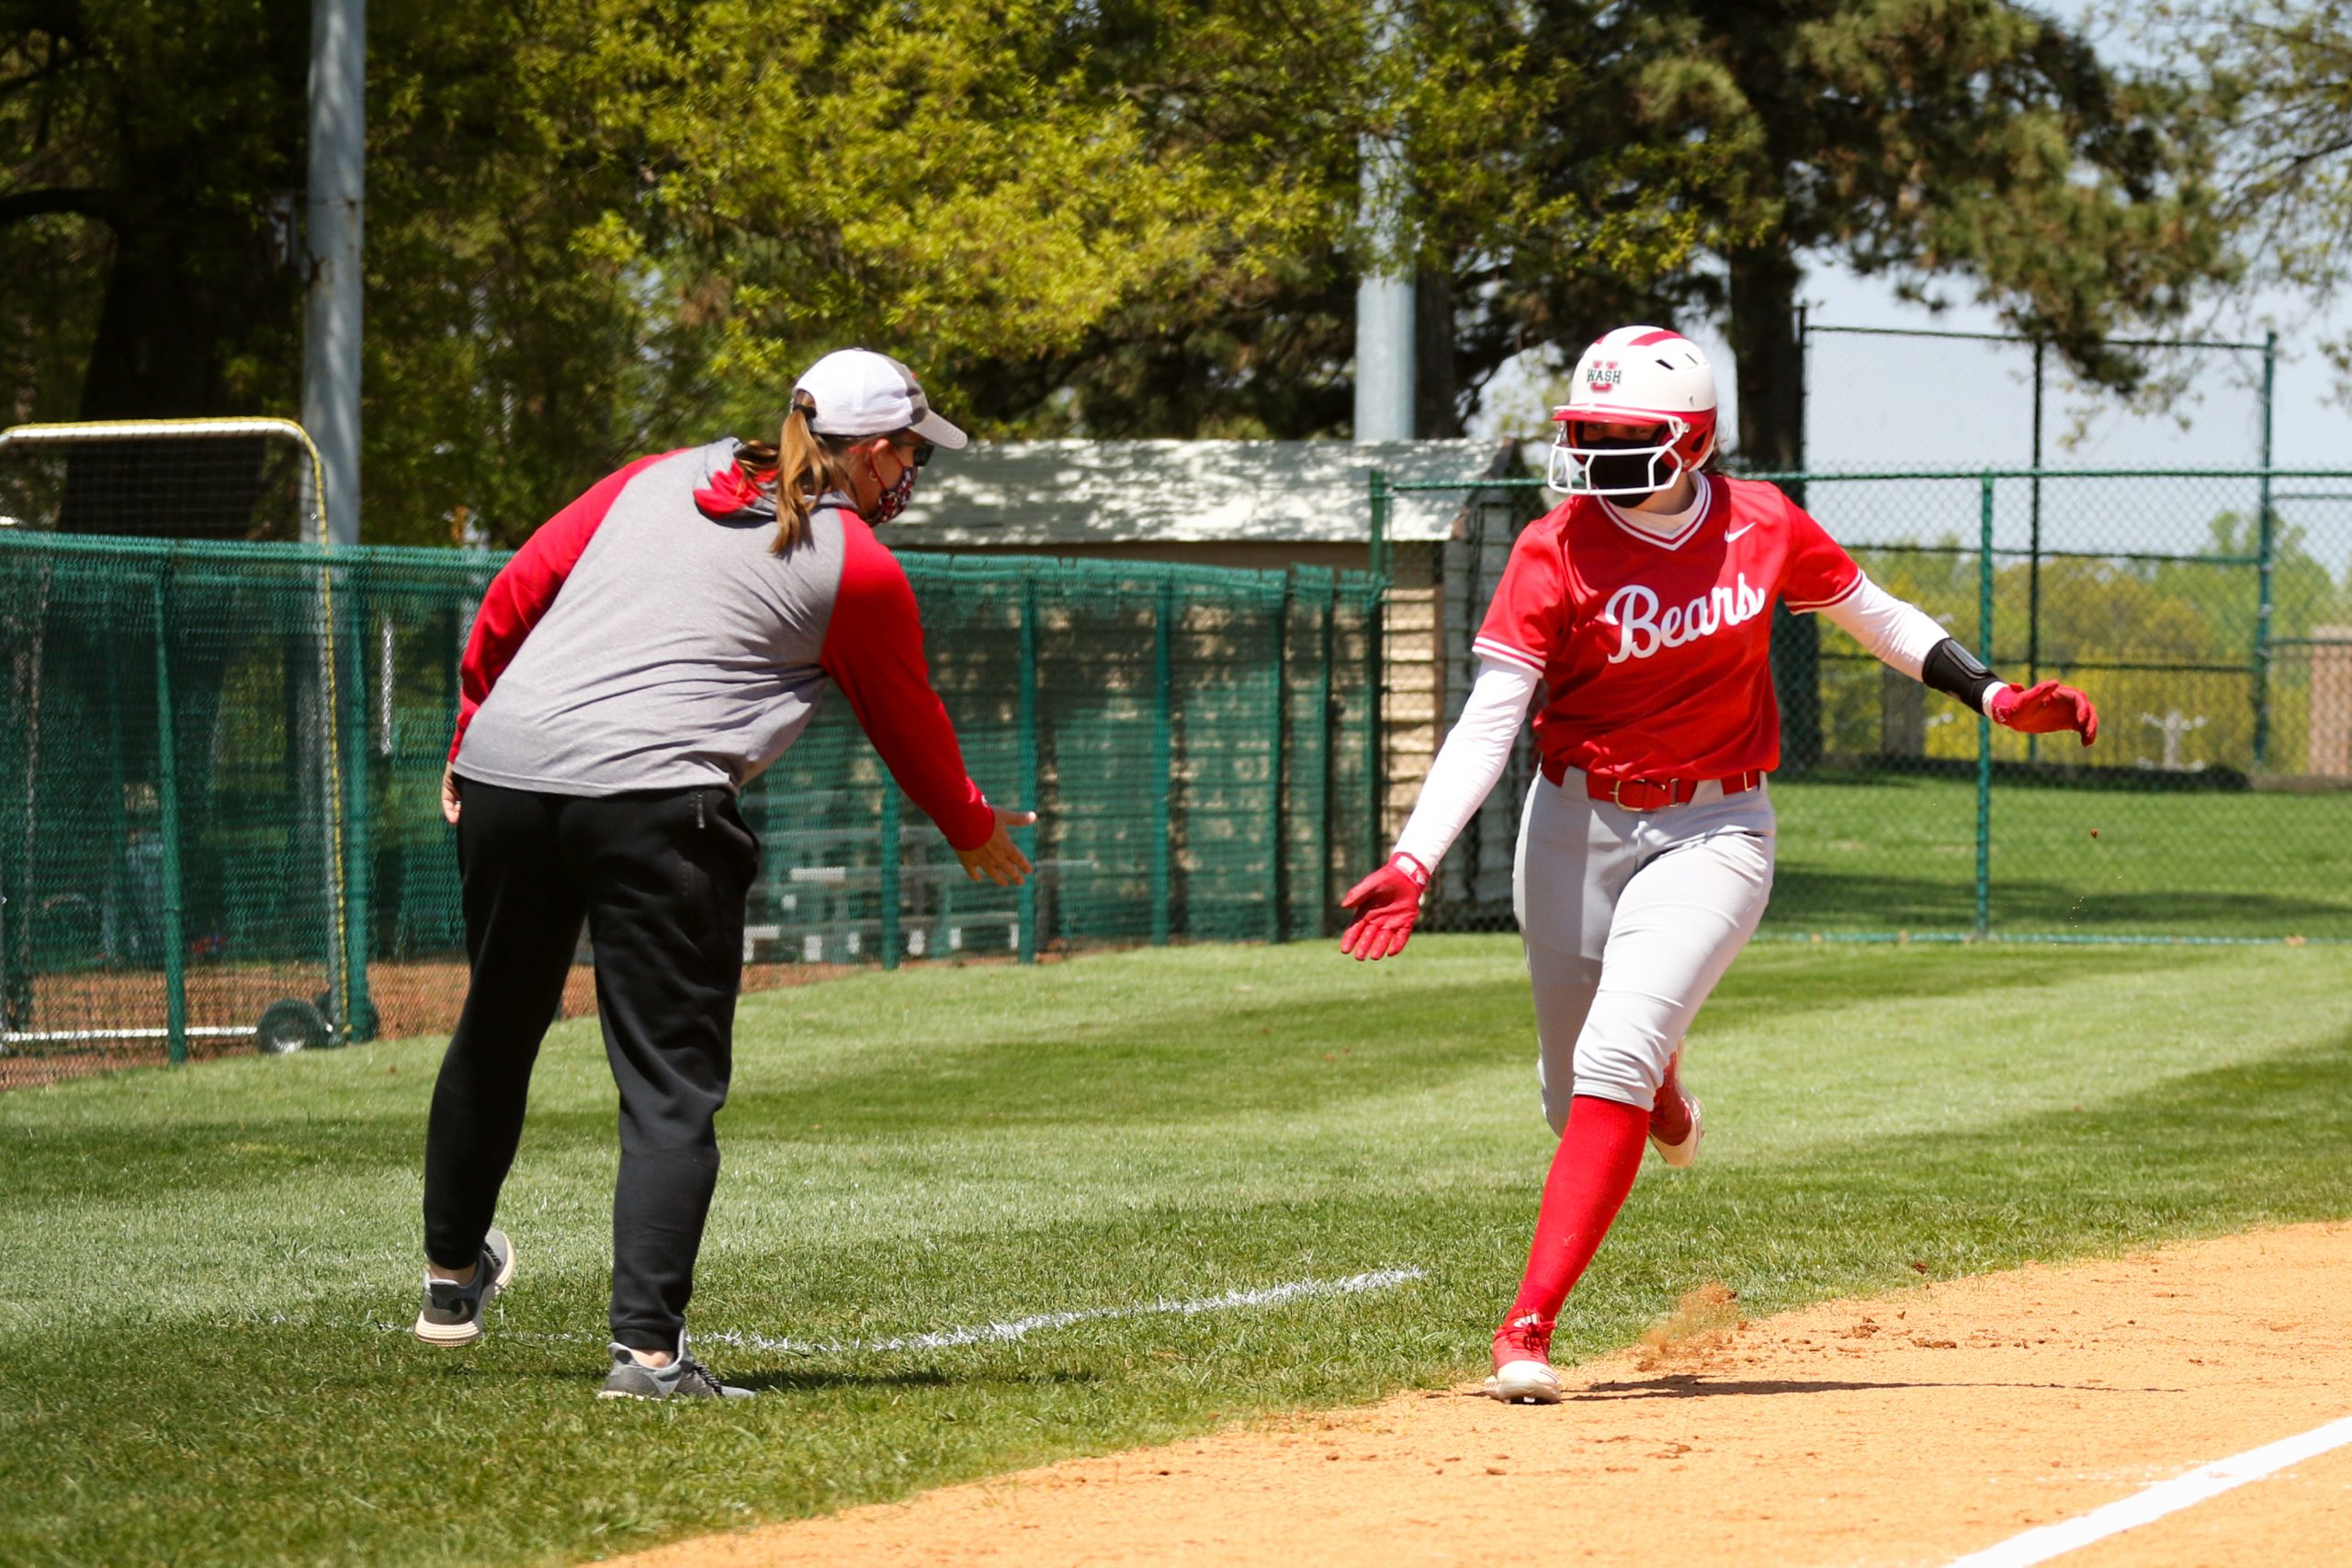 A softball player in a red jersey gives out a low-five to a coach in a red-and-gray shirt as she rounds the third base bag.